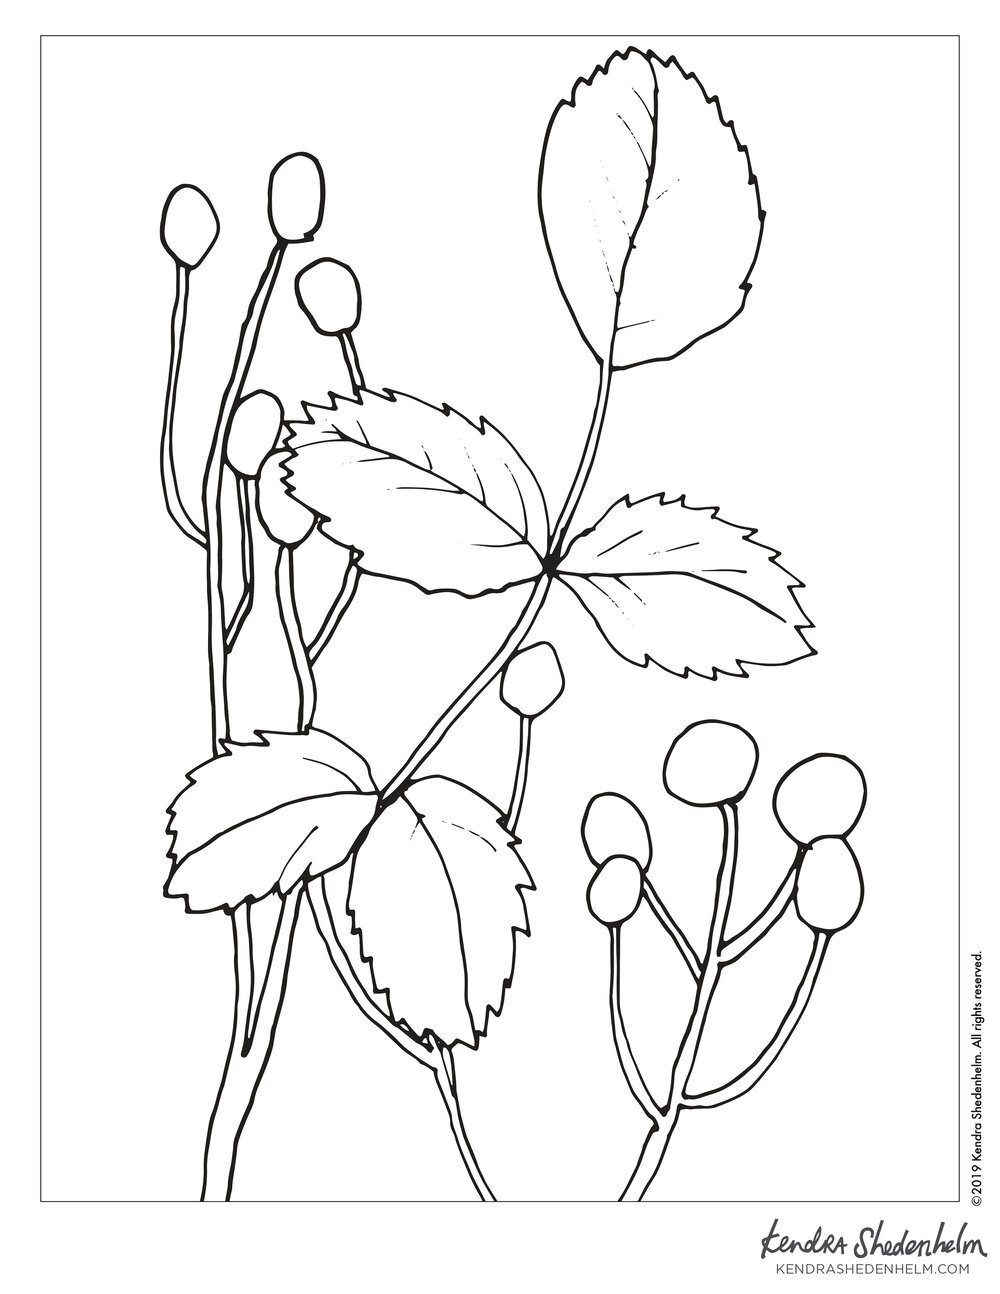 Free coloring page simple scene of leaves and berries by kendra shedenhelm â kendra shedenhelm